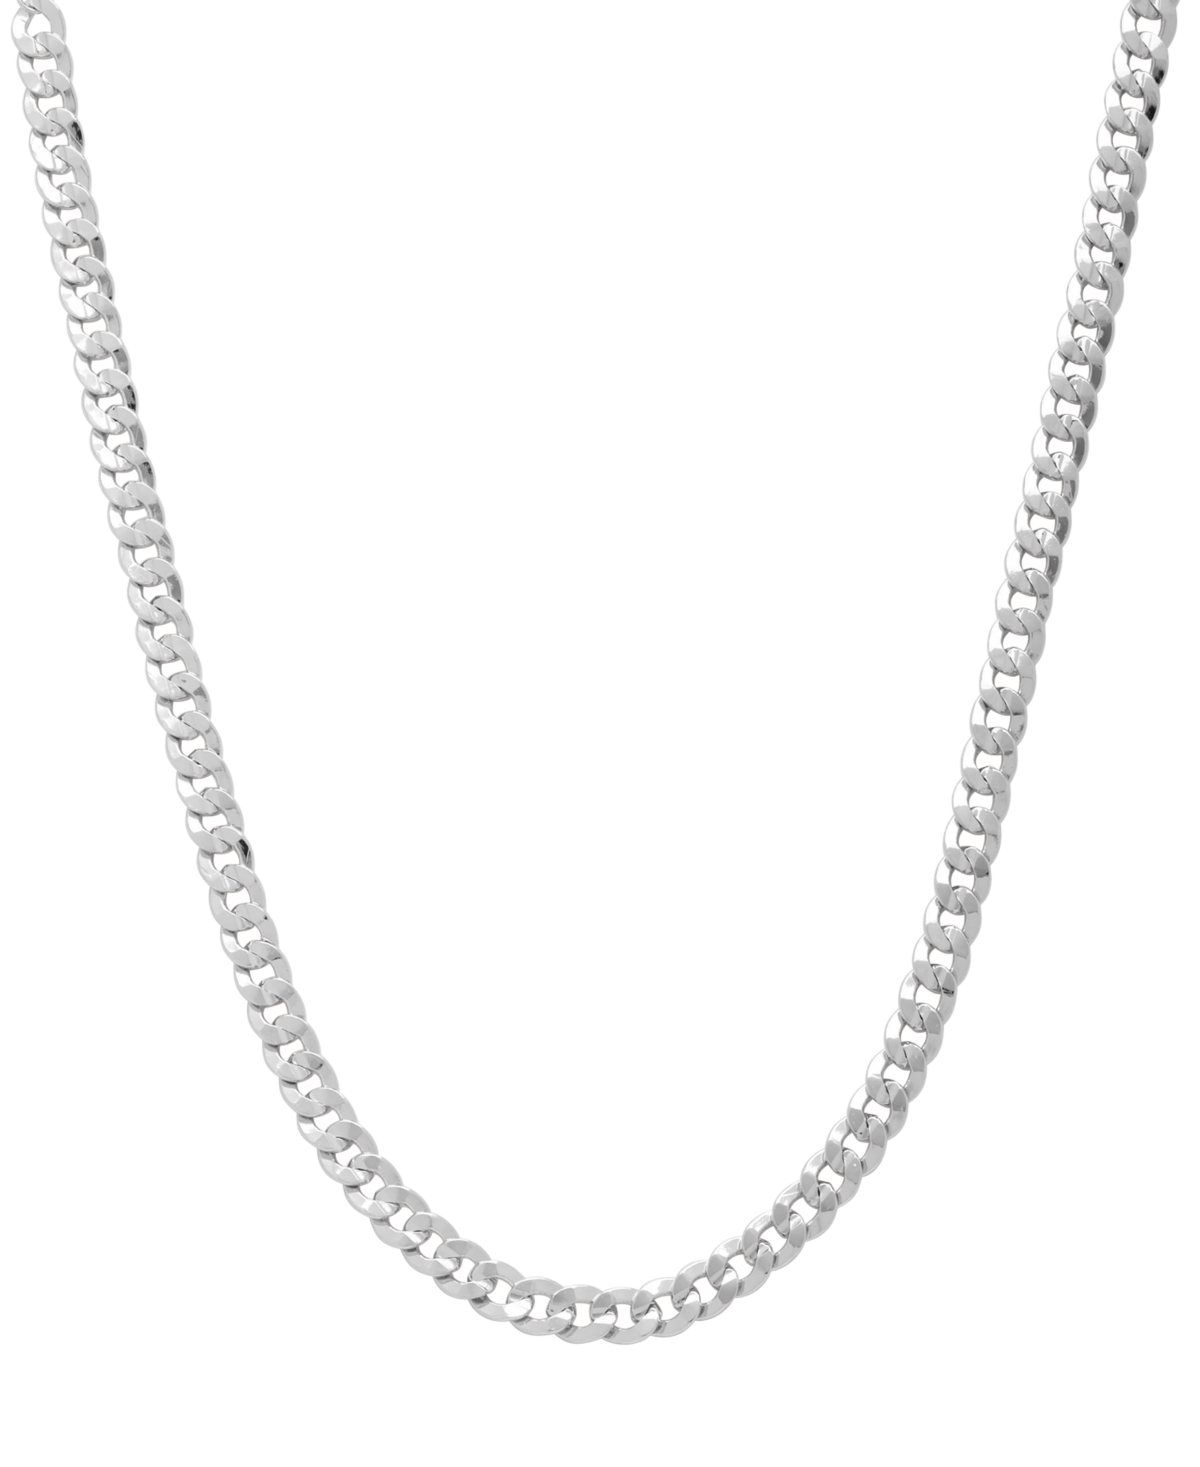 Women's Curb Chain Necklace - Fine Silver Plated